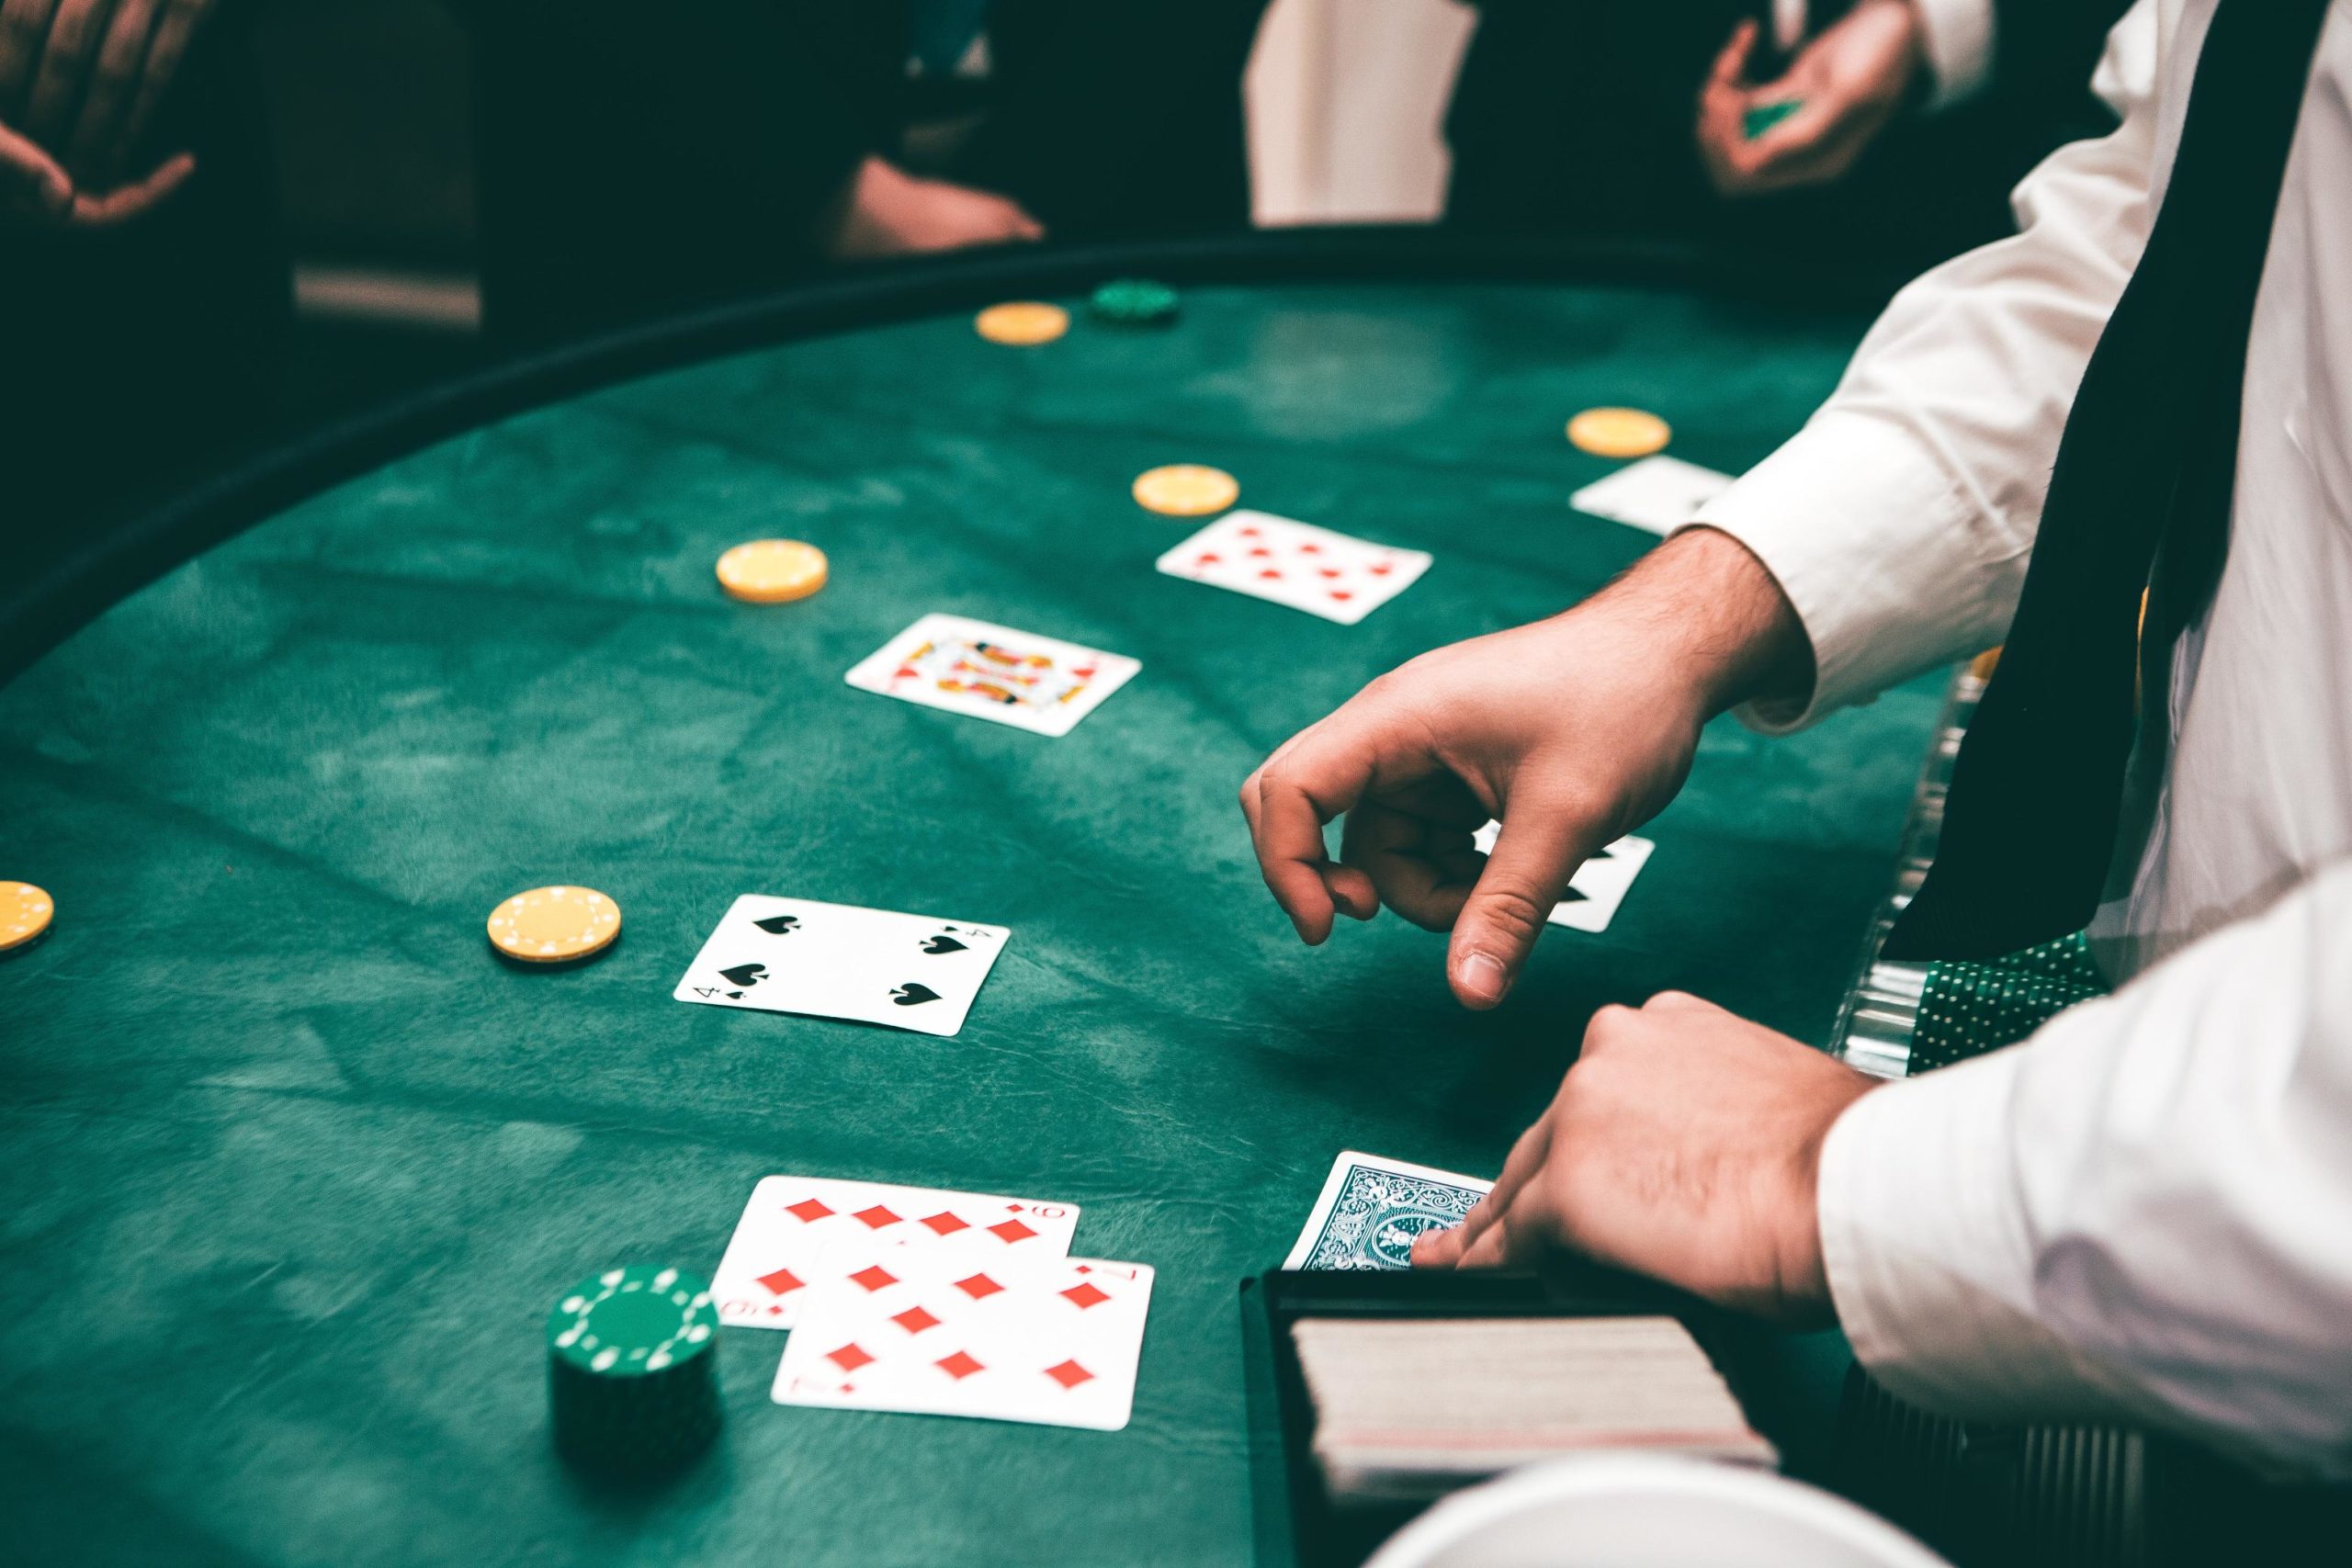 The High-Stakes Shuffle: Mastering the Art of Poker Chip Maneuvers